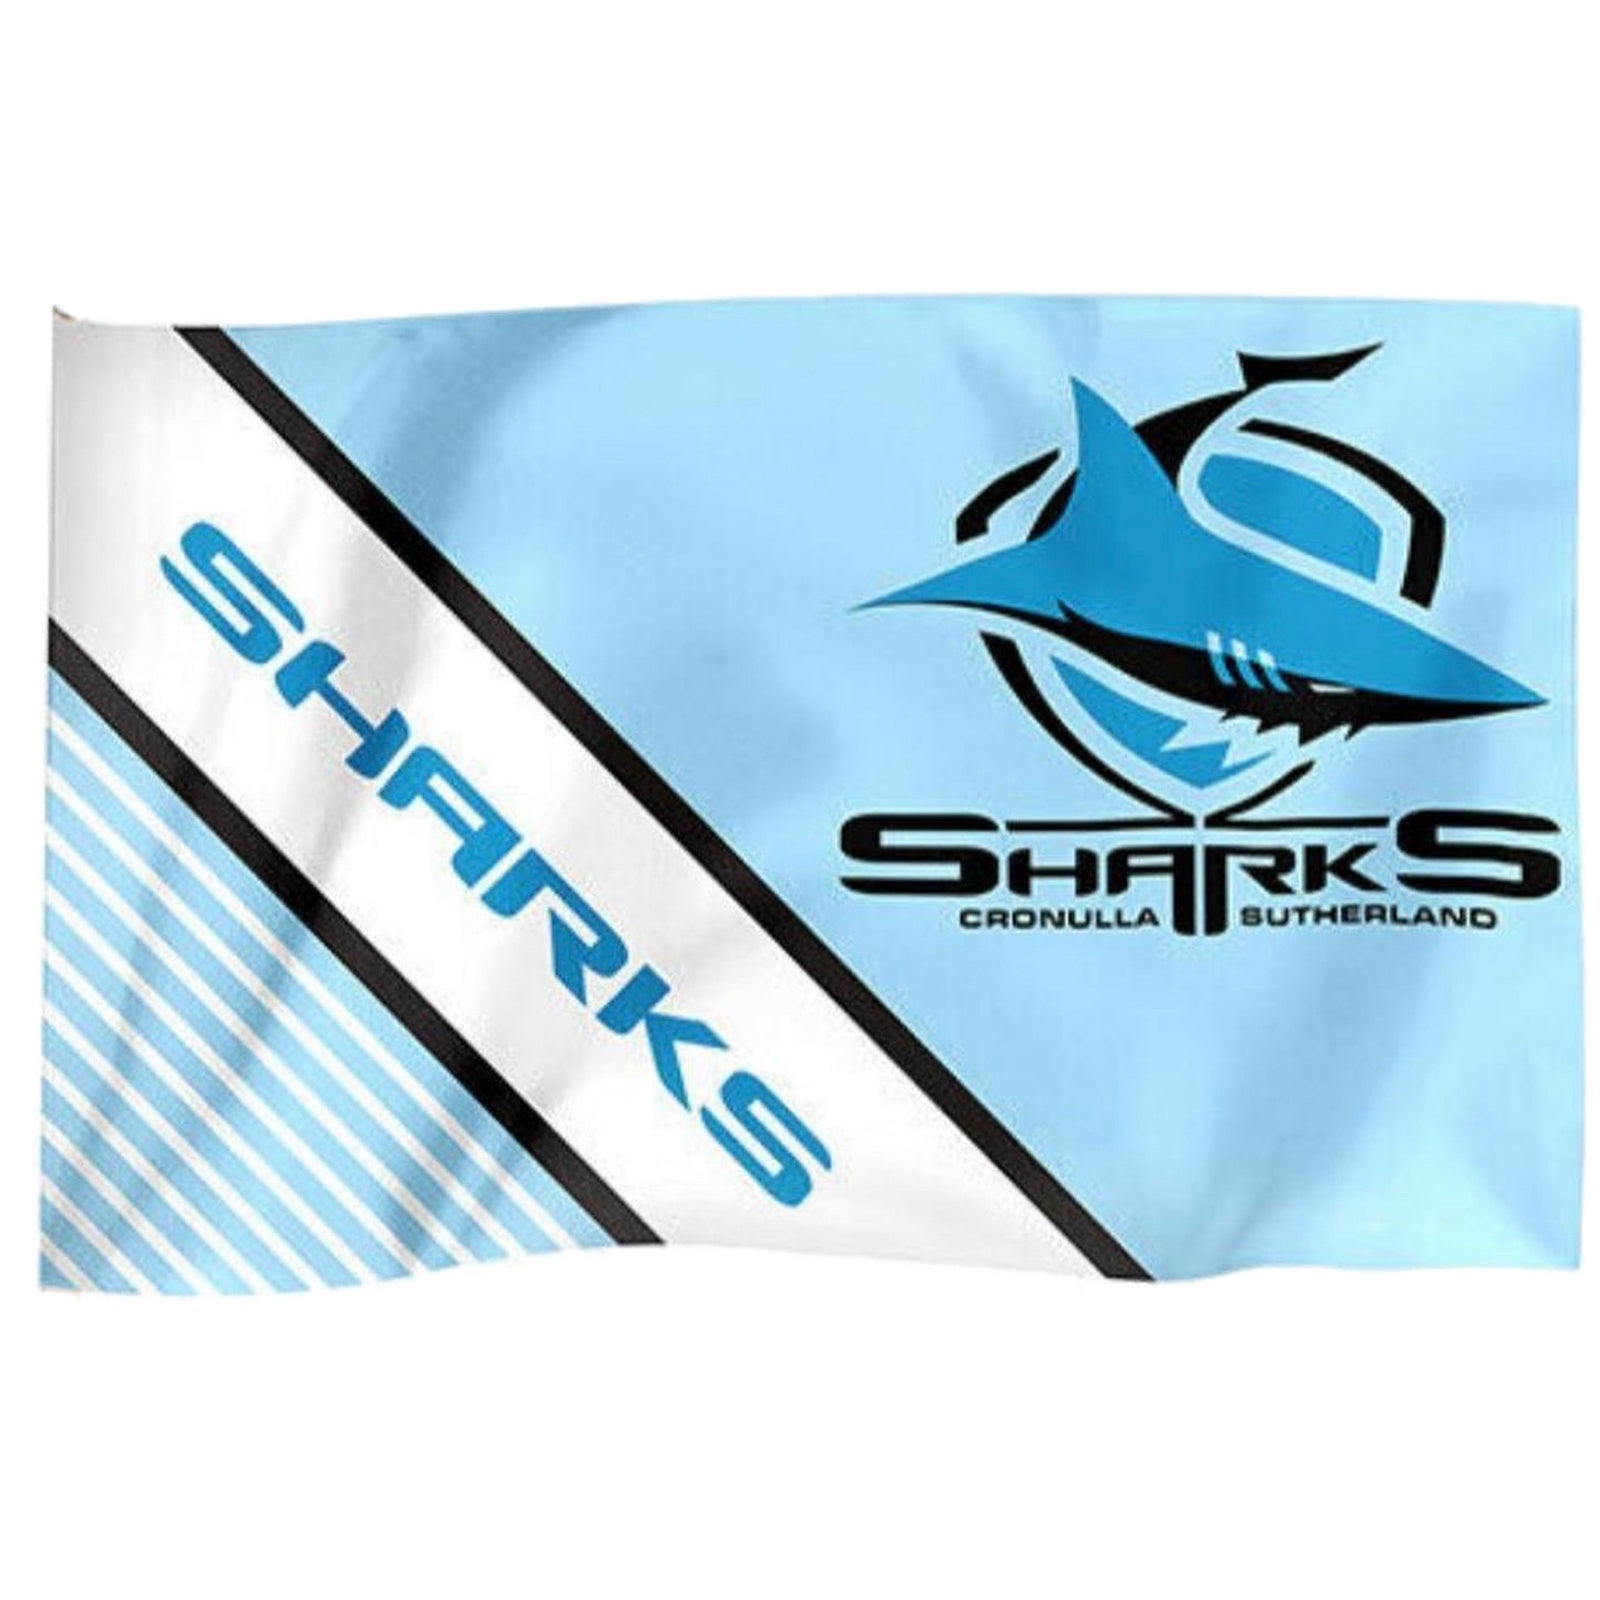 Cronulla Sutherland Sharks NRL Game Day Flag 85cm x 60cm (Without Pole Stick ) Mick Simmons Sport